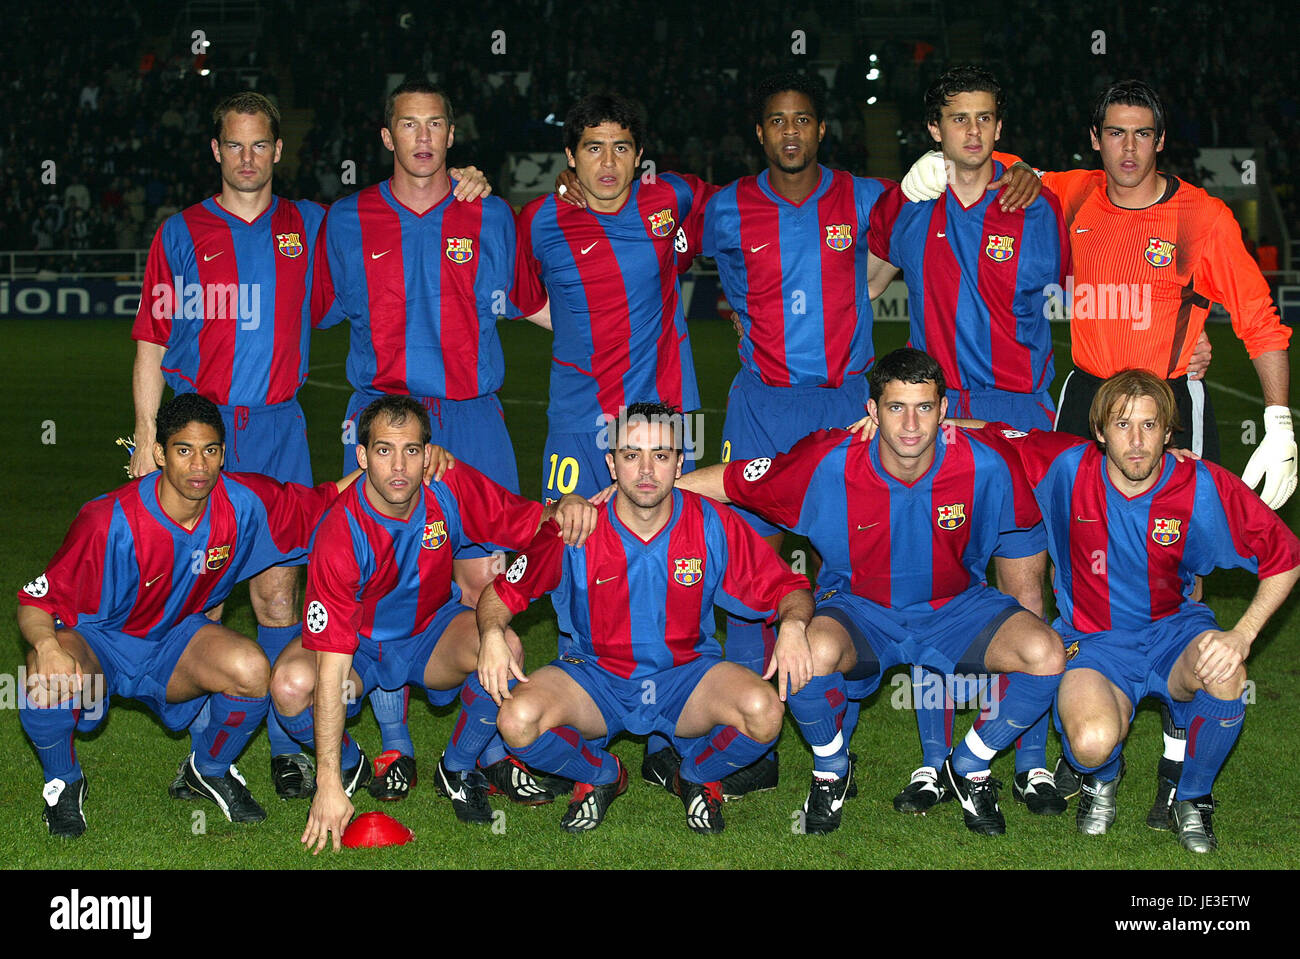 Fc barcelona team hi-res stock photography and images - Alamy